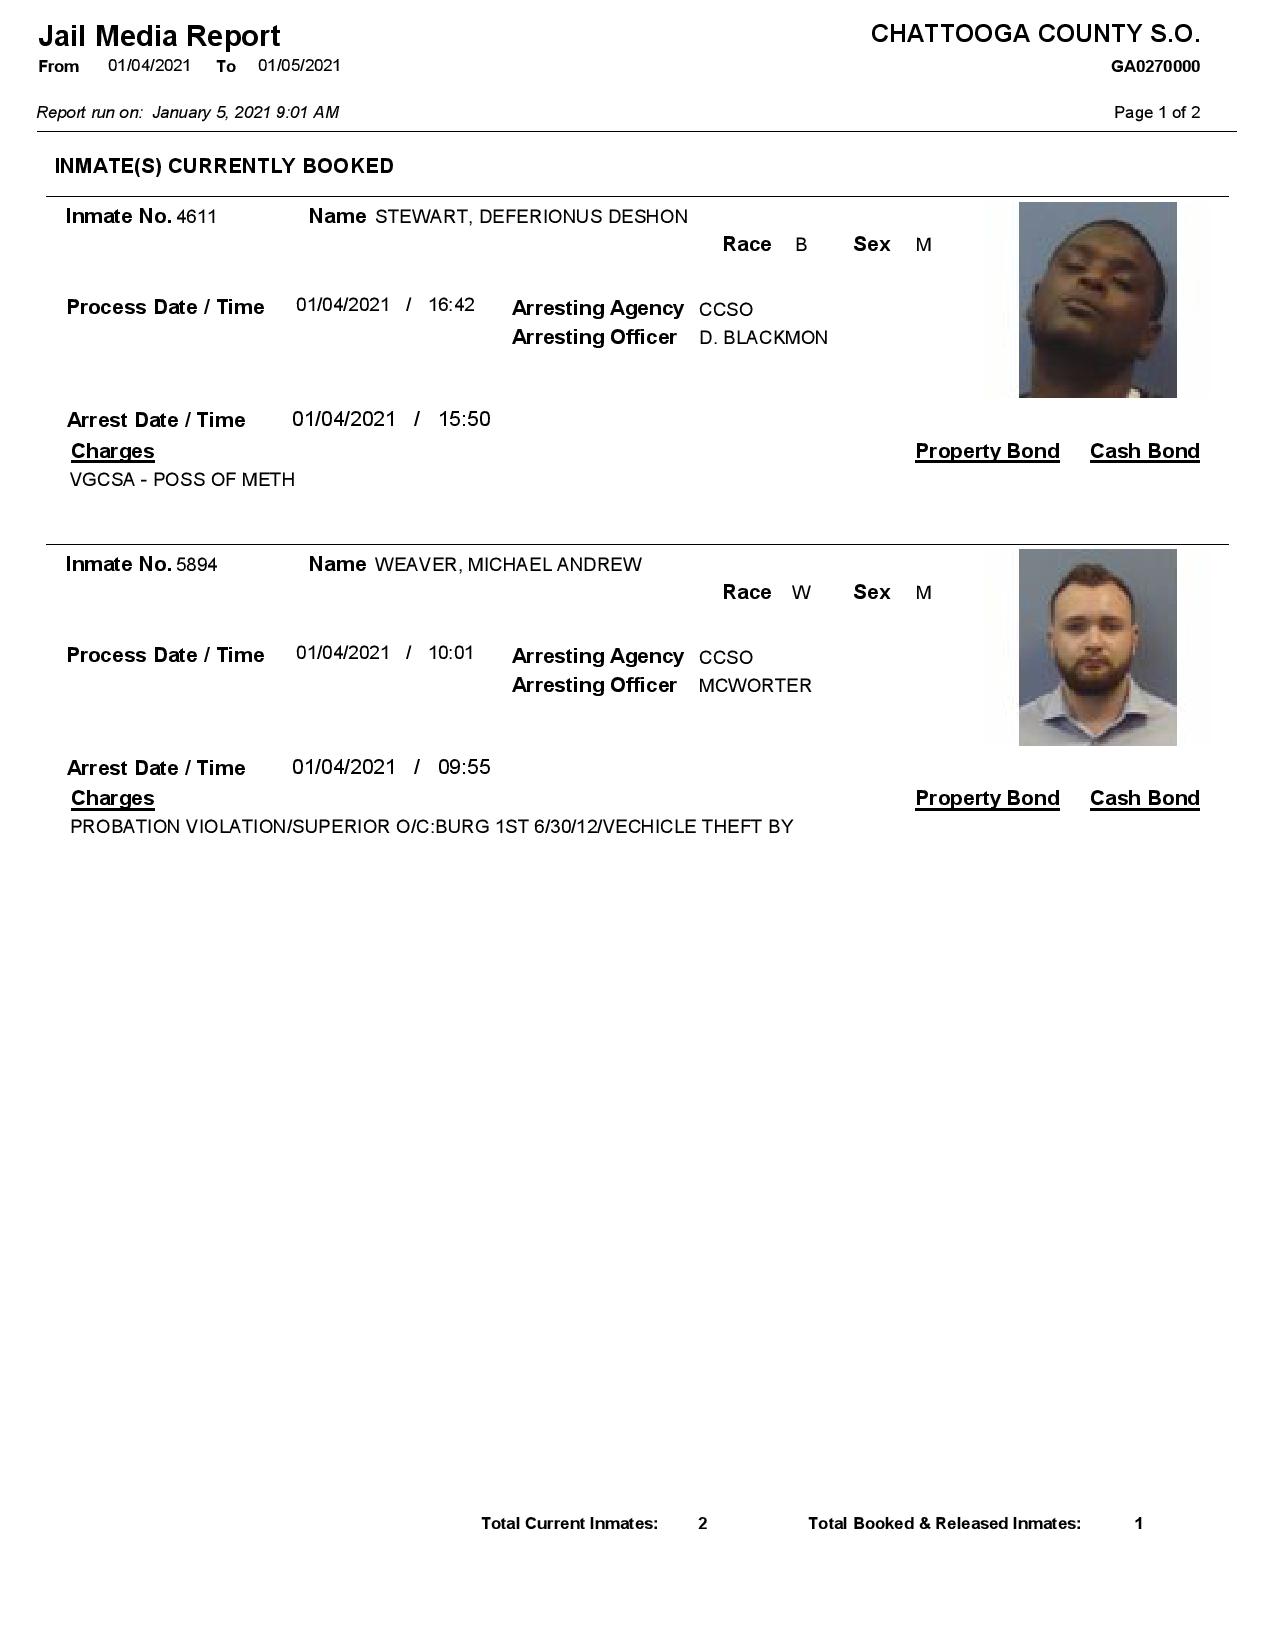 chattooga jail 01.05.21-page-001